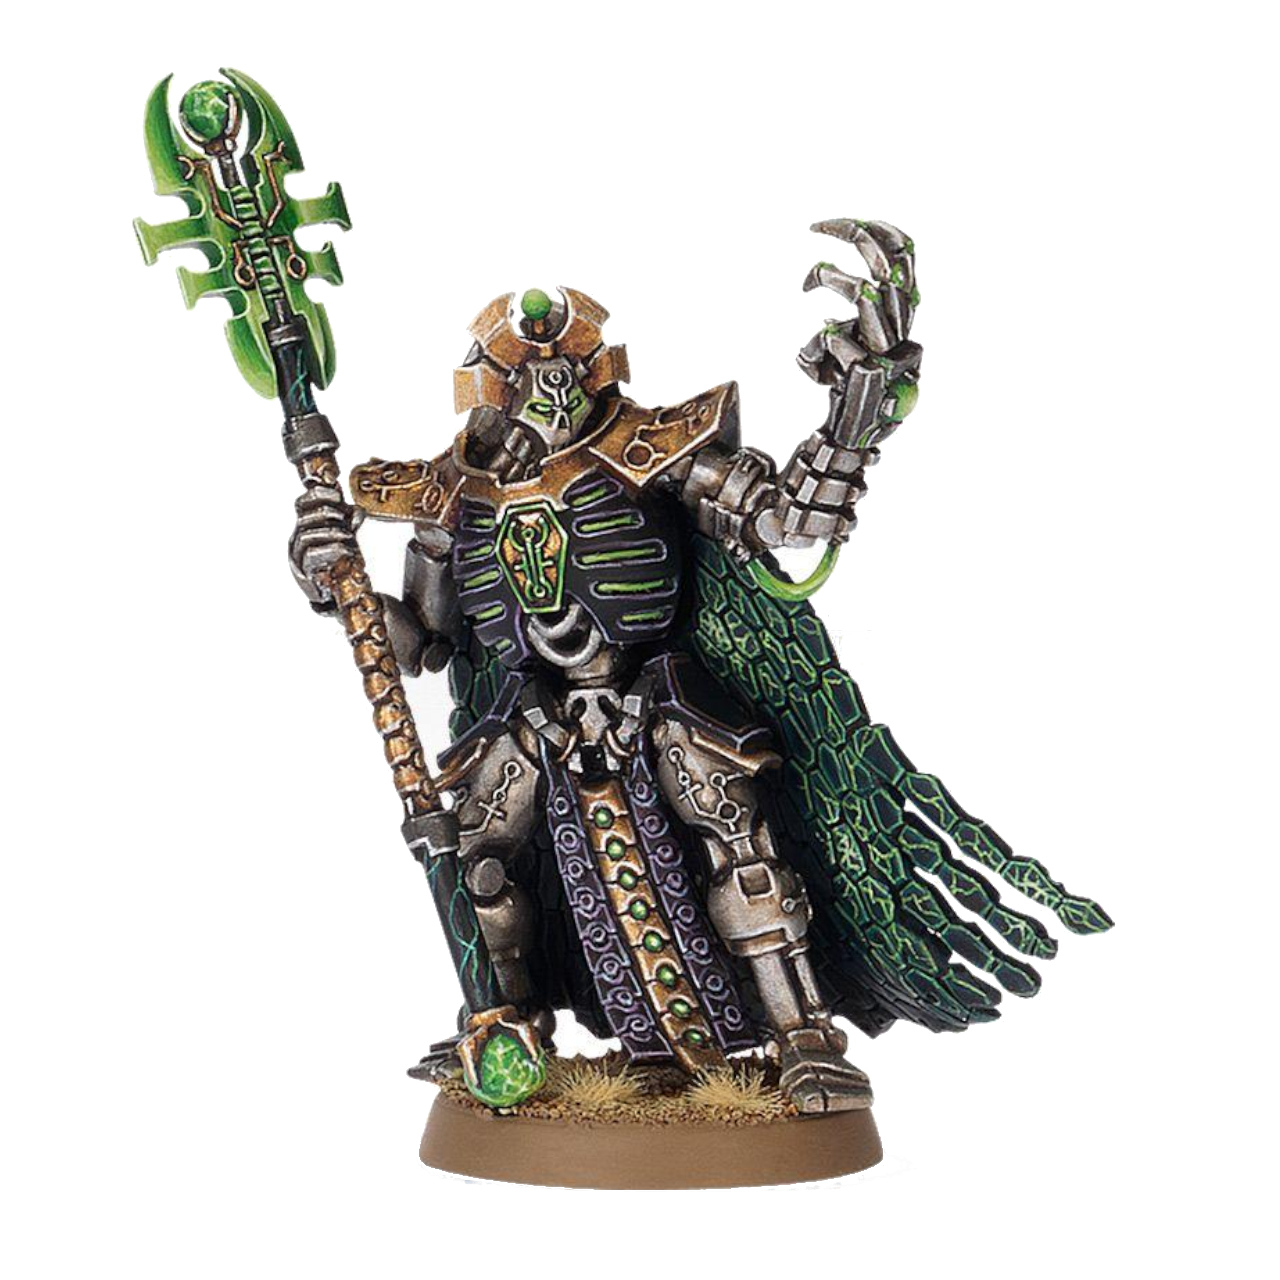 Original Imotekh the Stormlord model on a plain background